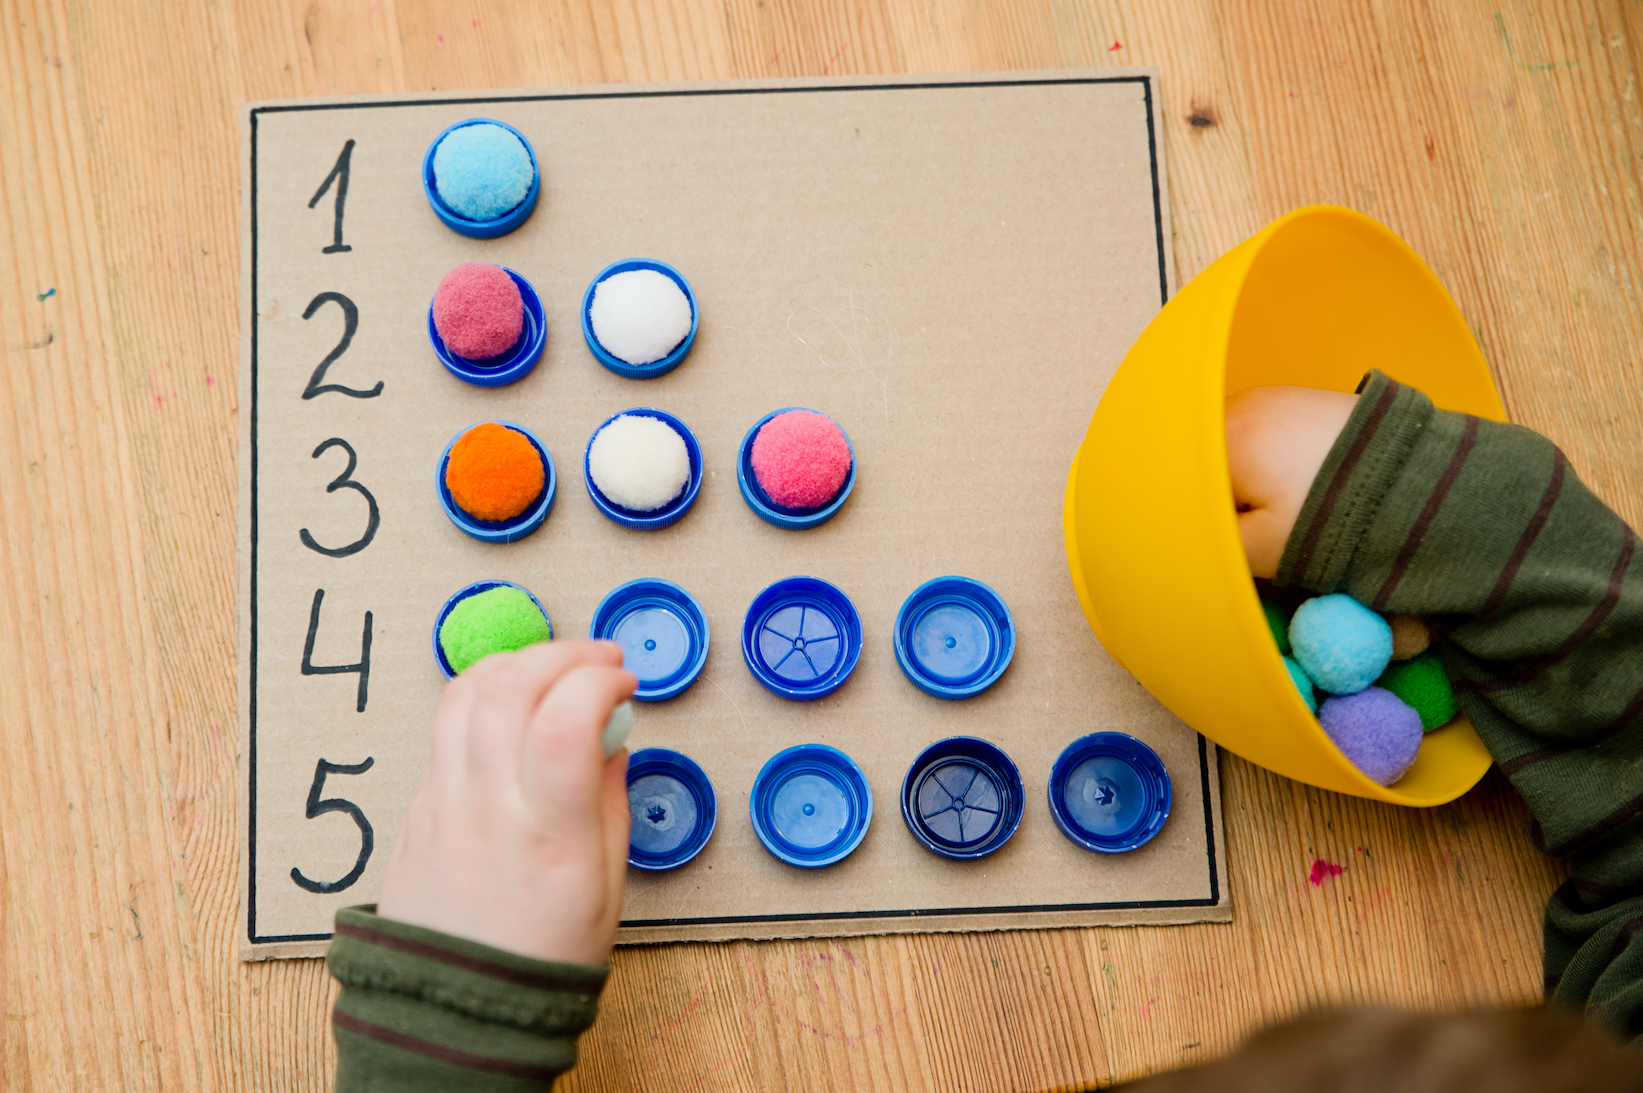  A child is sorting colorful pom poms into bottle caps numbered one to five to learn about numbers.